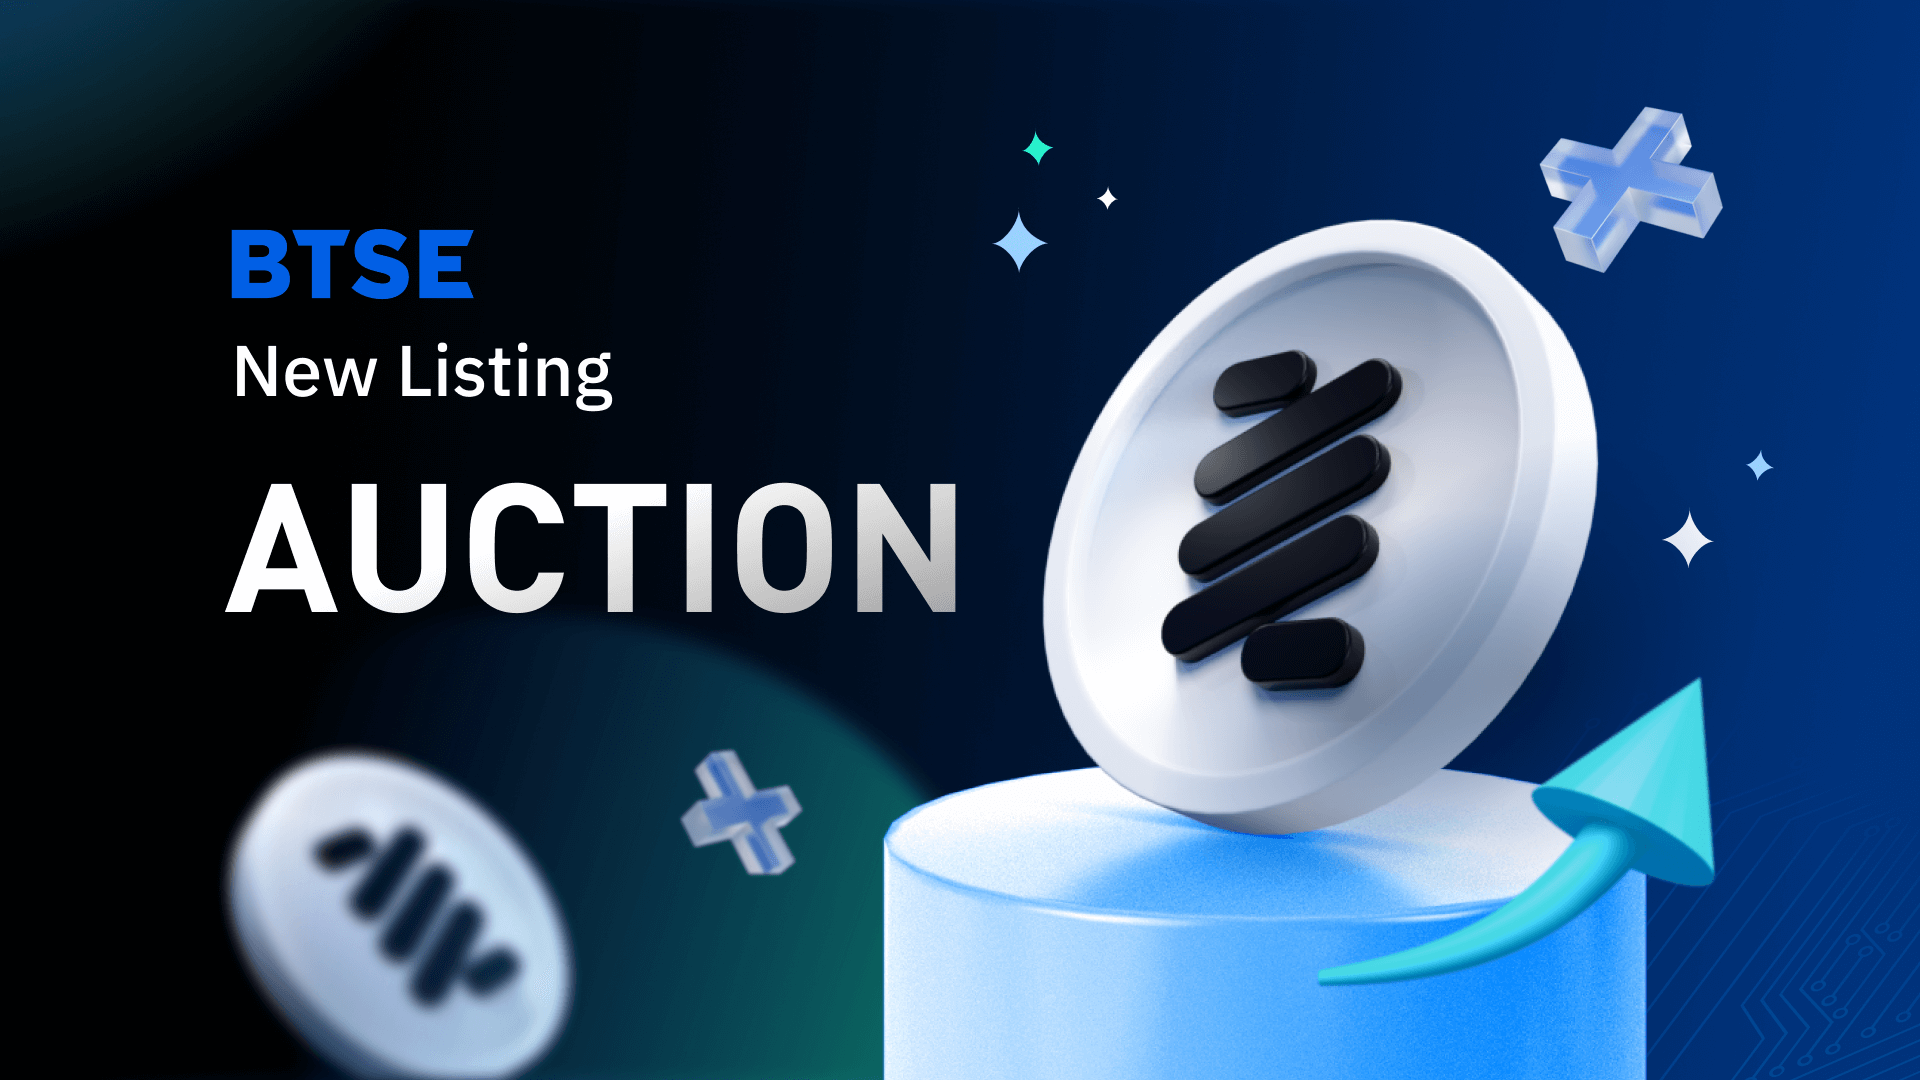 BTSE Welcomes Bounce (AUCTION)